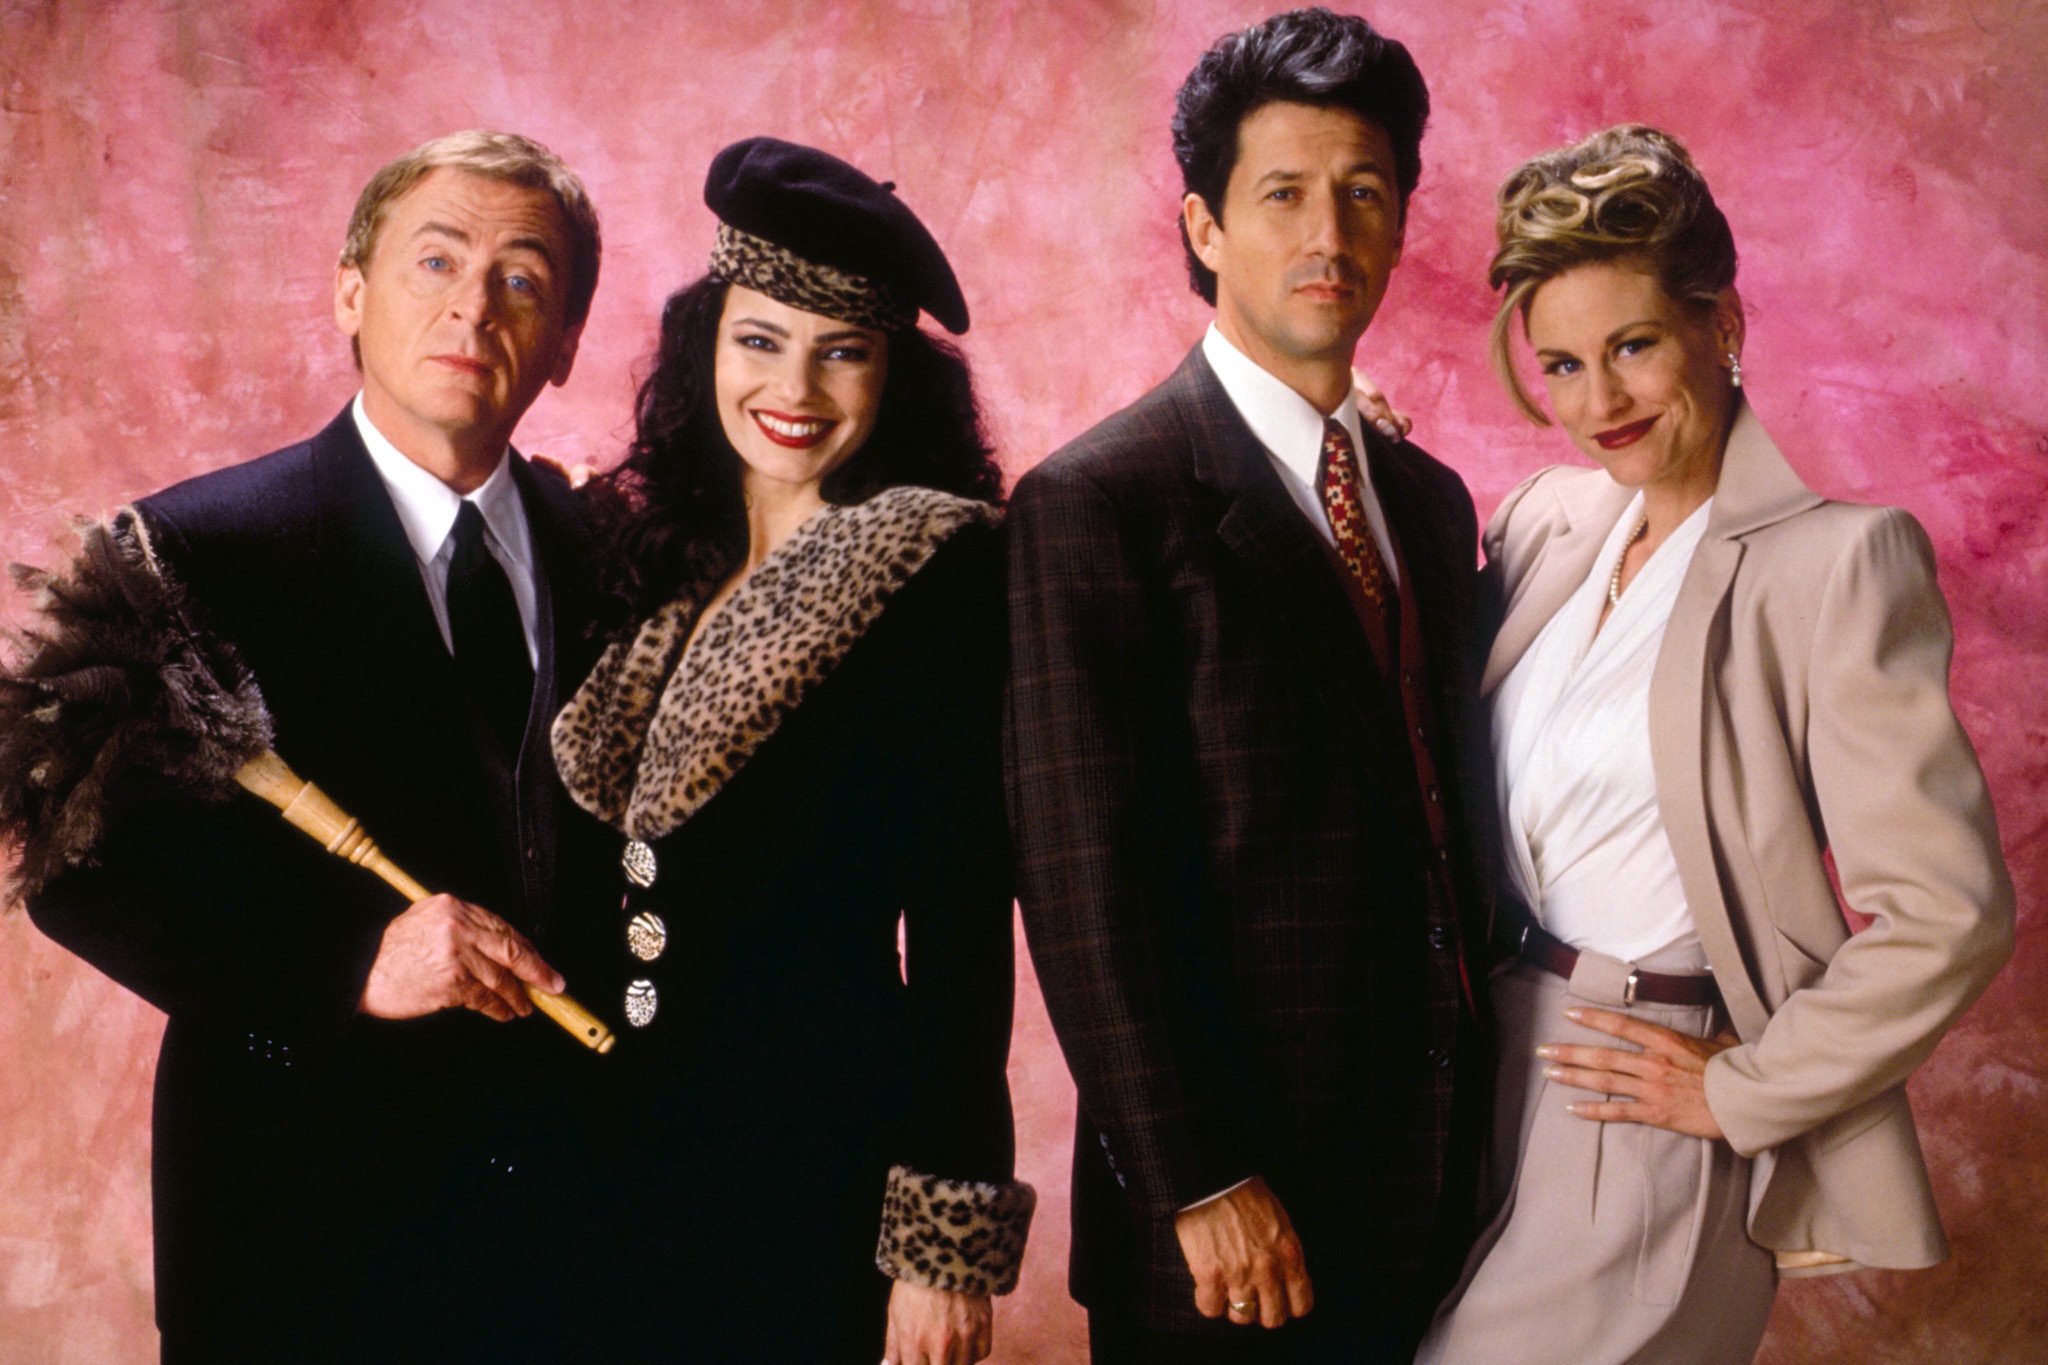 Daniel Davis; Fran Drescher; Charles Shaugnessy; and Lauren Lane in a promotional photo for 'The Nanny'